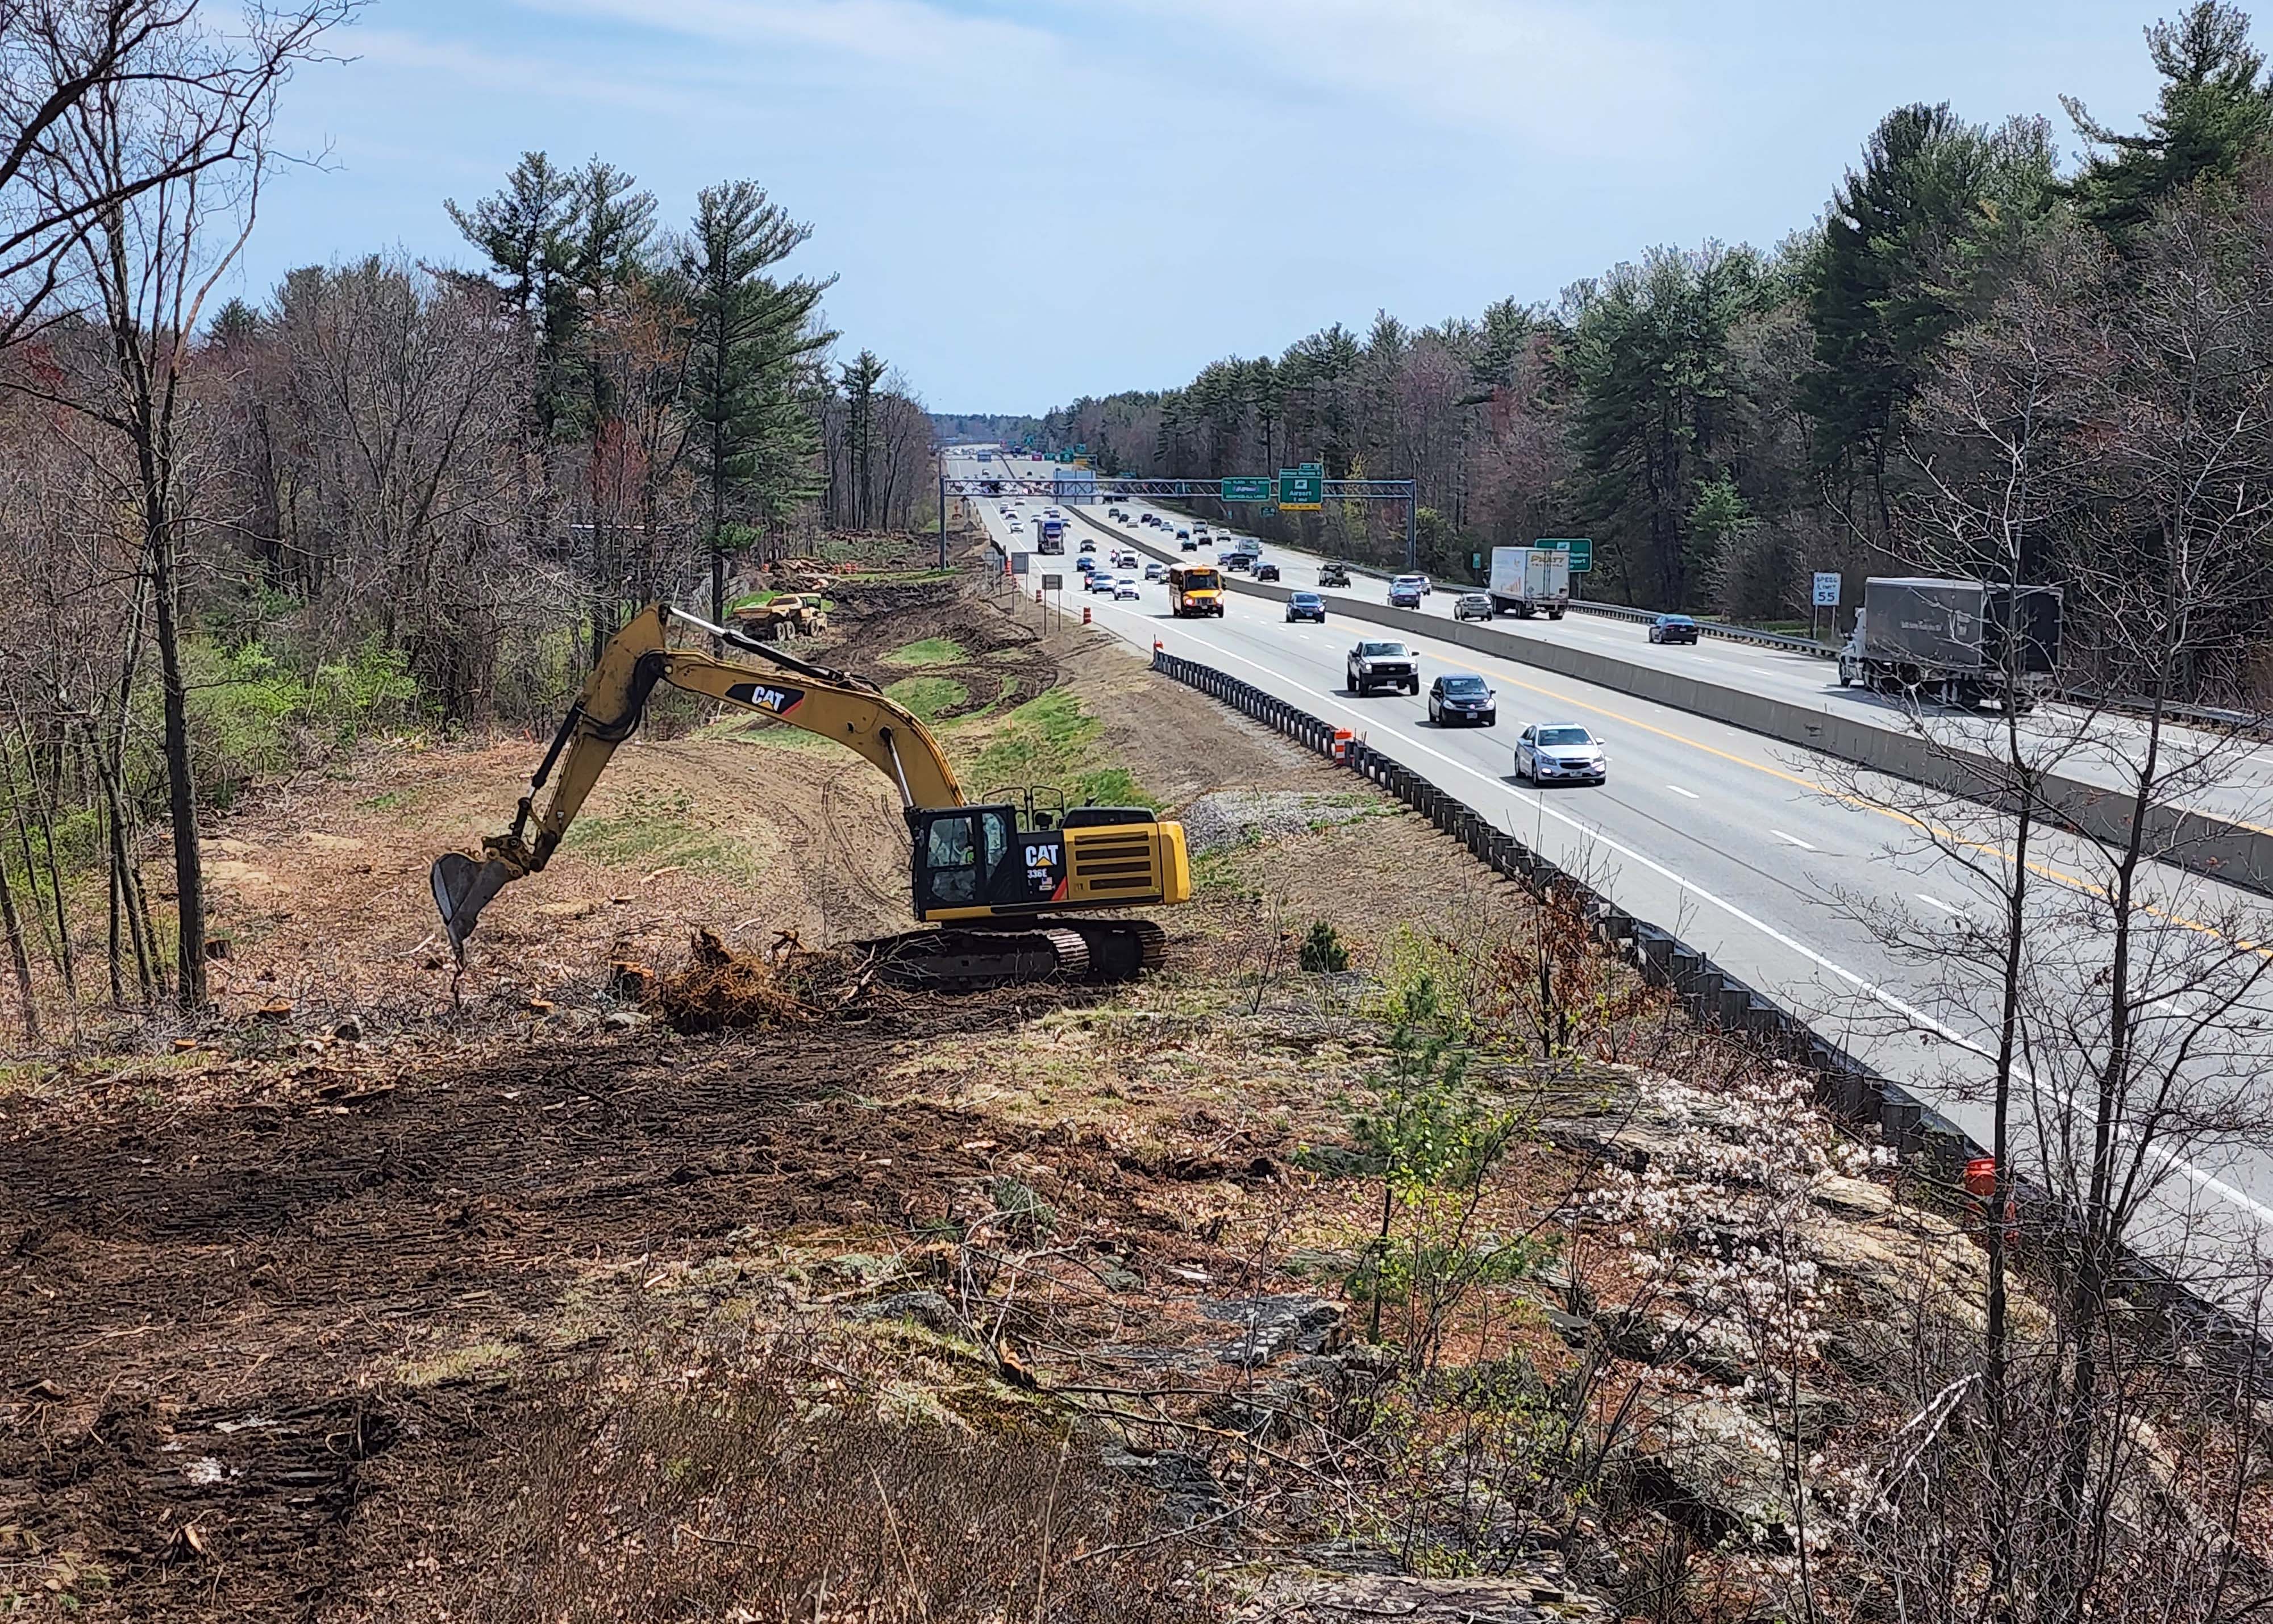 Tree clearing along Northbound F.E. Everett Turnpike south of US Rt.3 bridge - June 2022